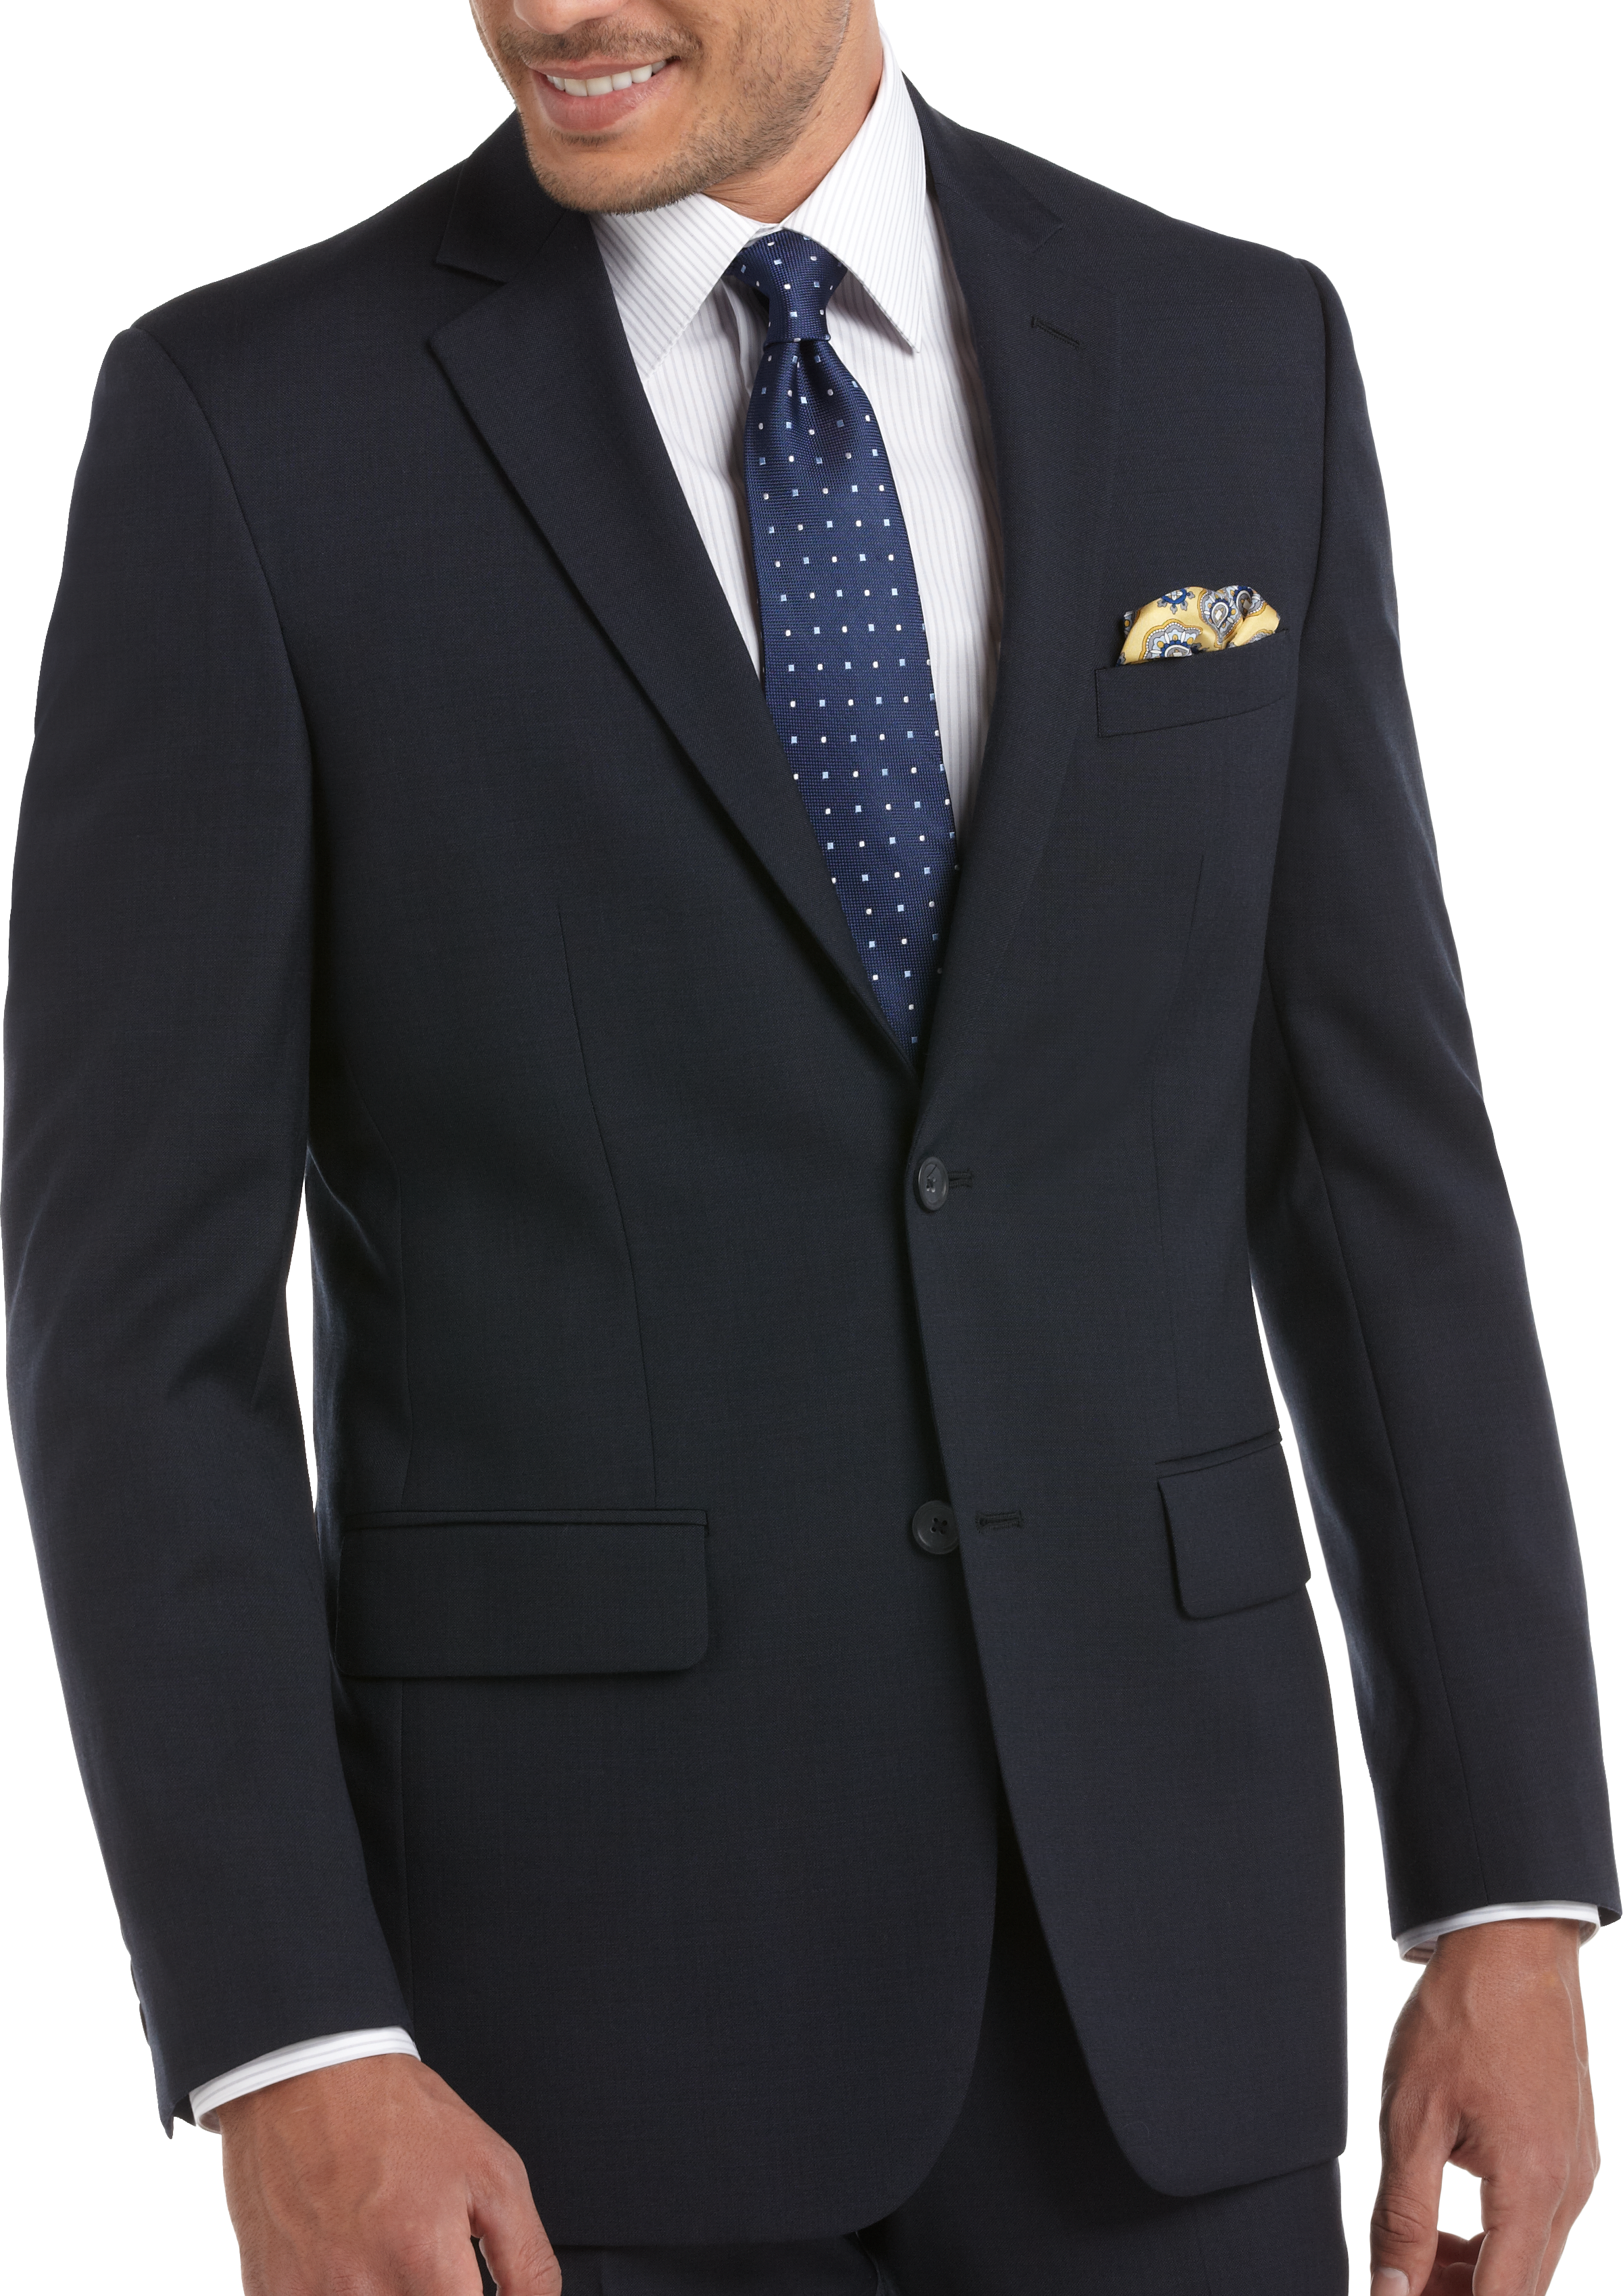 Portly Suits For Men | Men'S Wearhouse